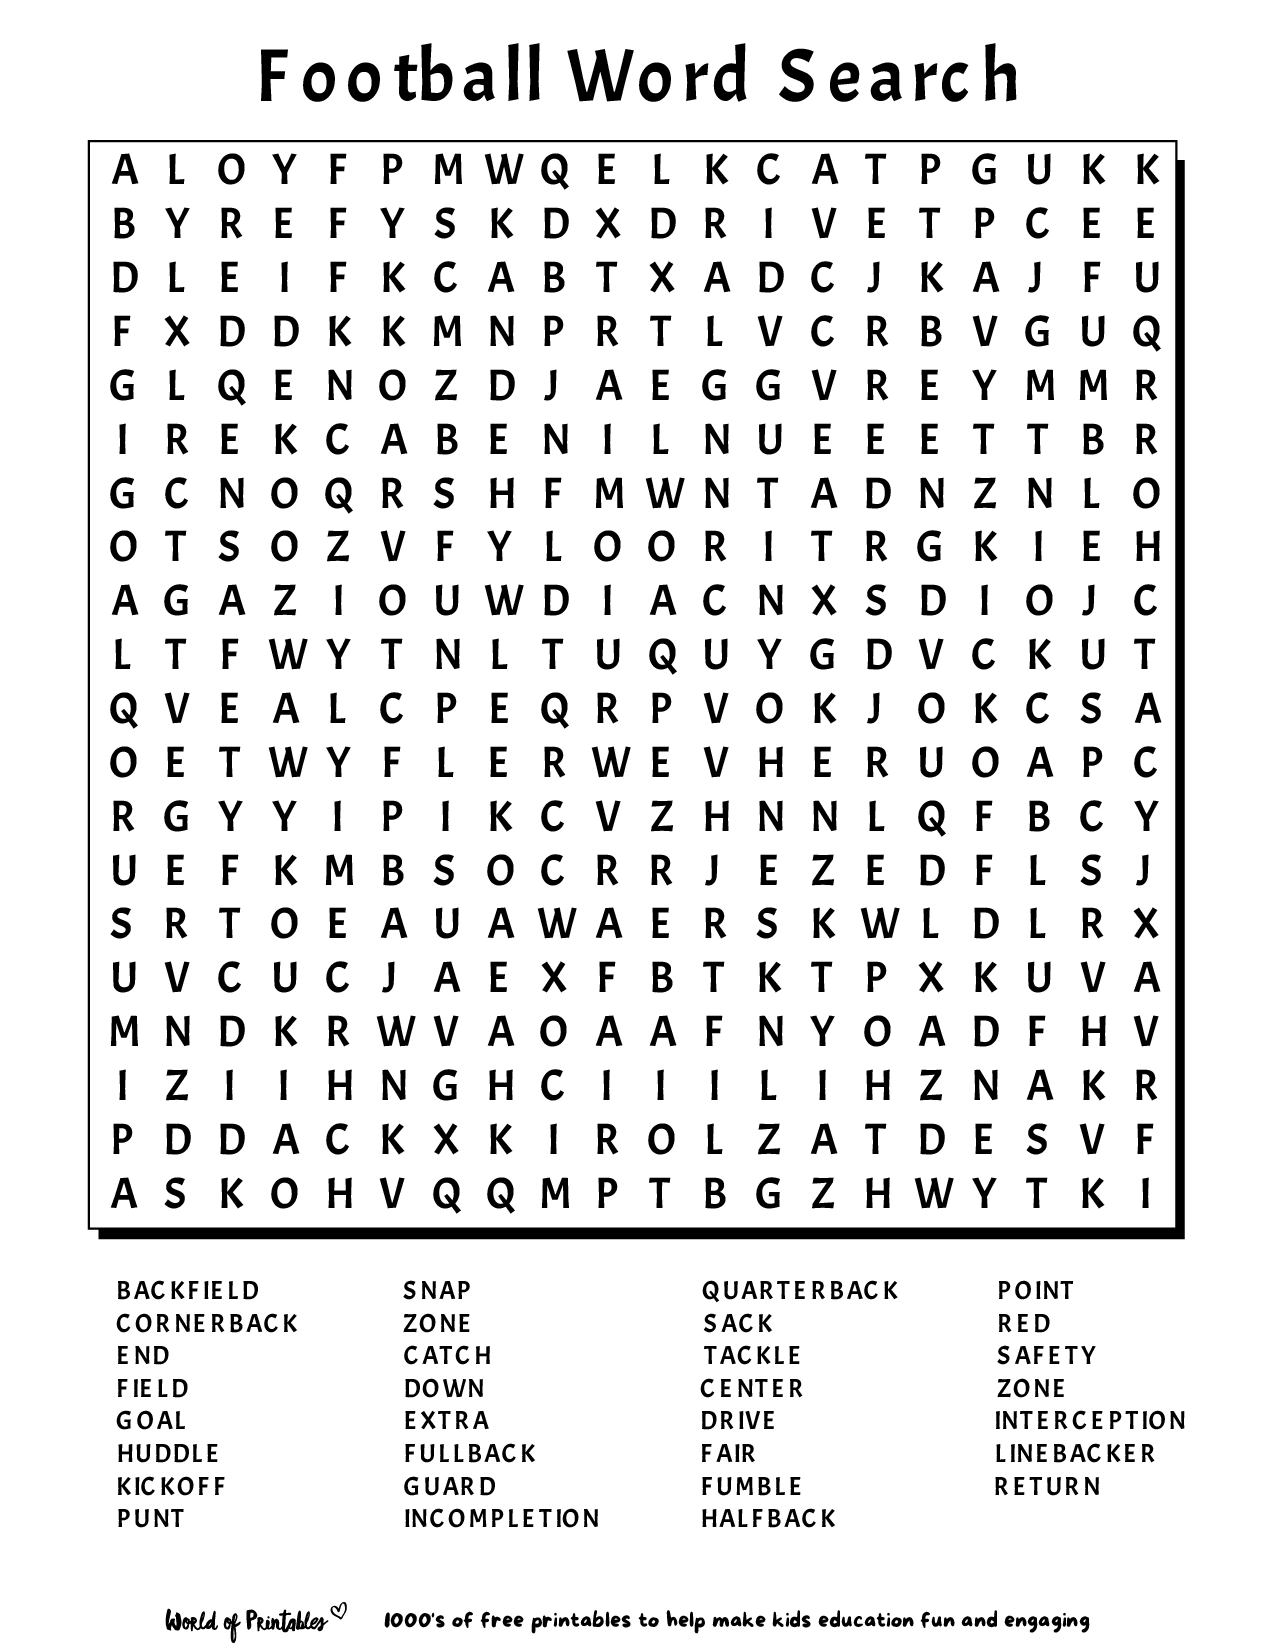 Word Search Print Out